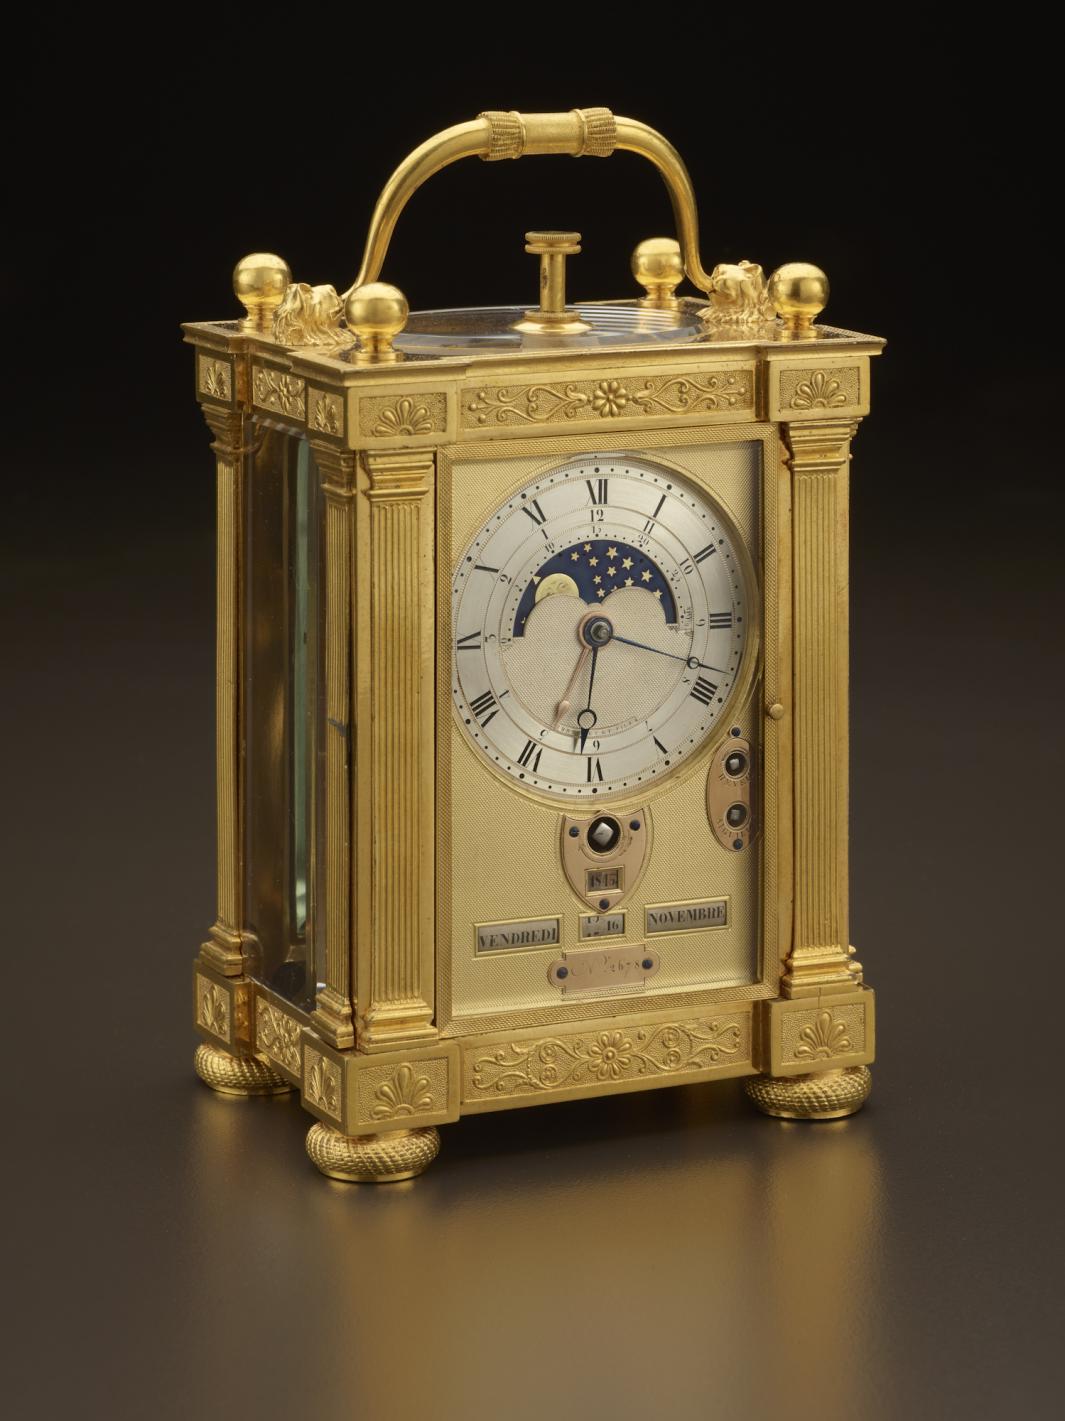 gold carriage clock with multiple dials and handle, and depiction of  night sky